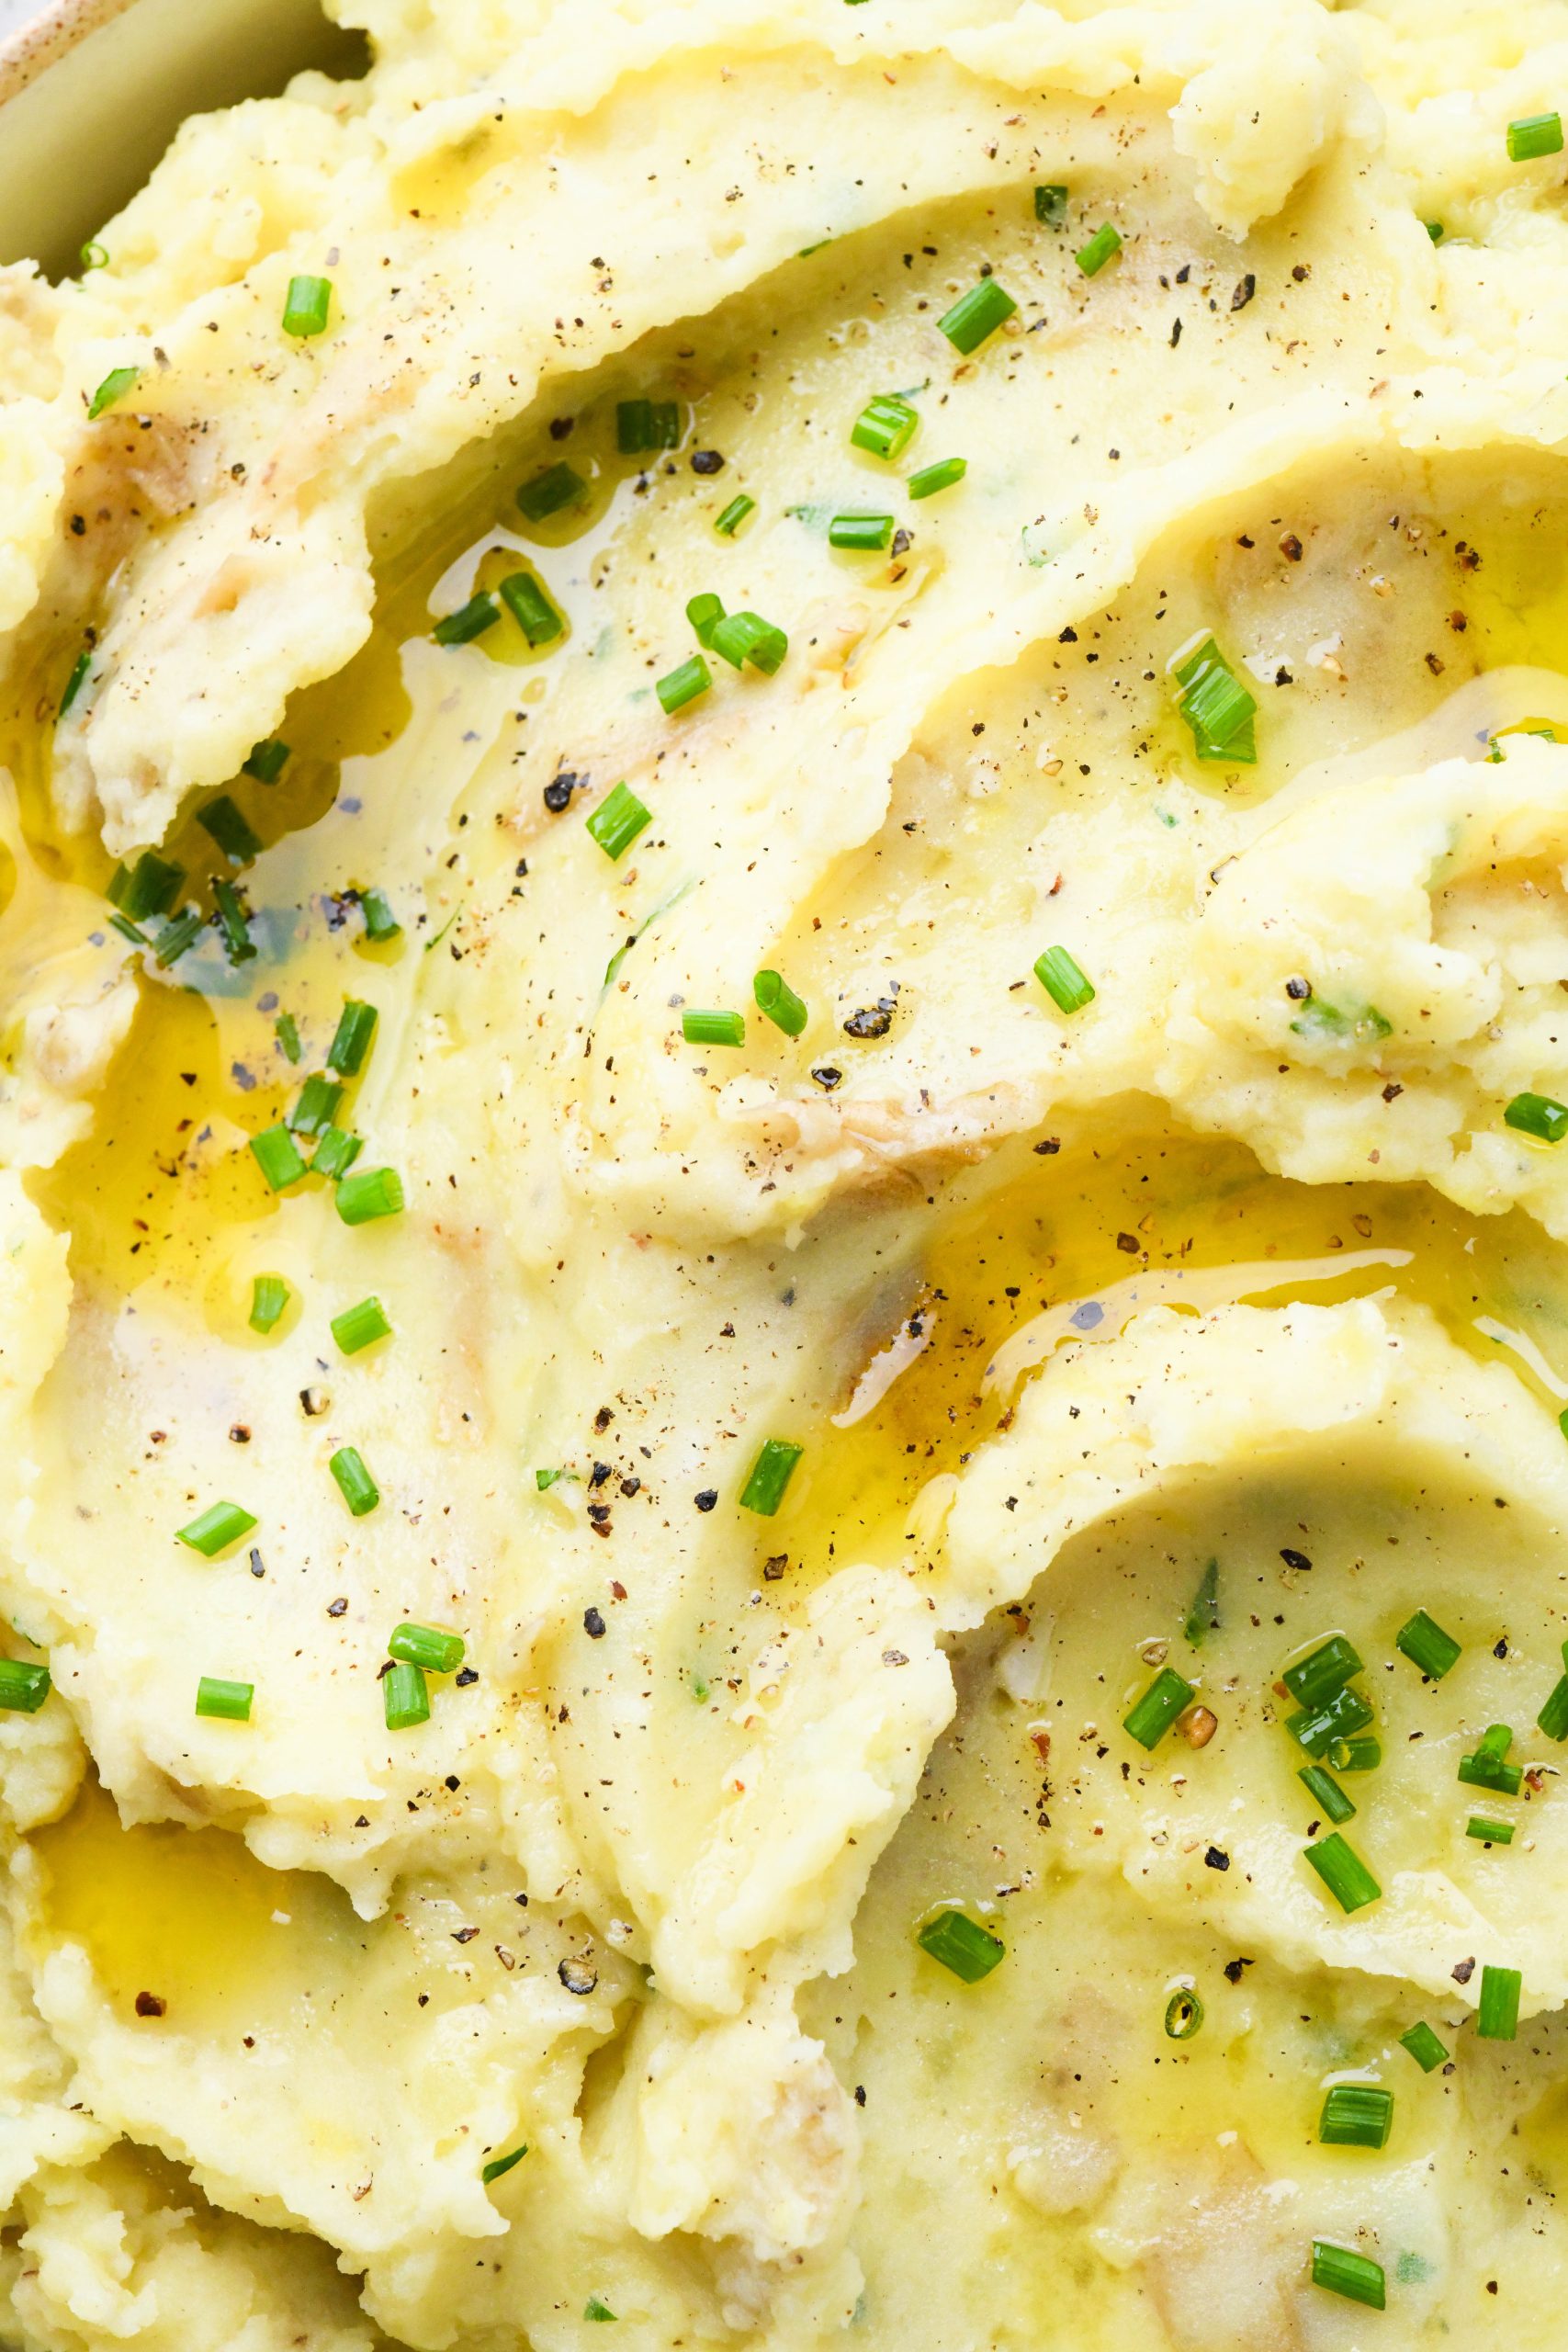 Creamed New Potatoes with Herbs - Momsdish